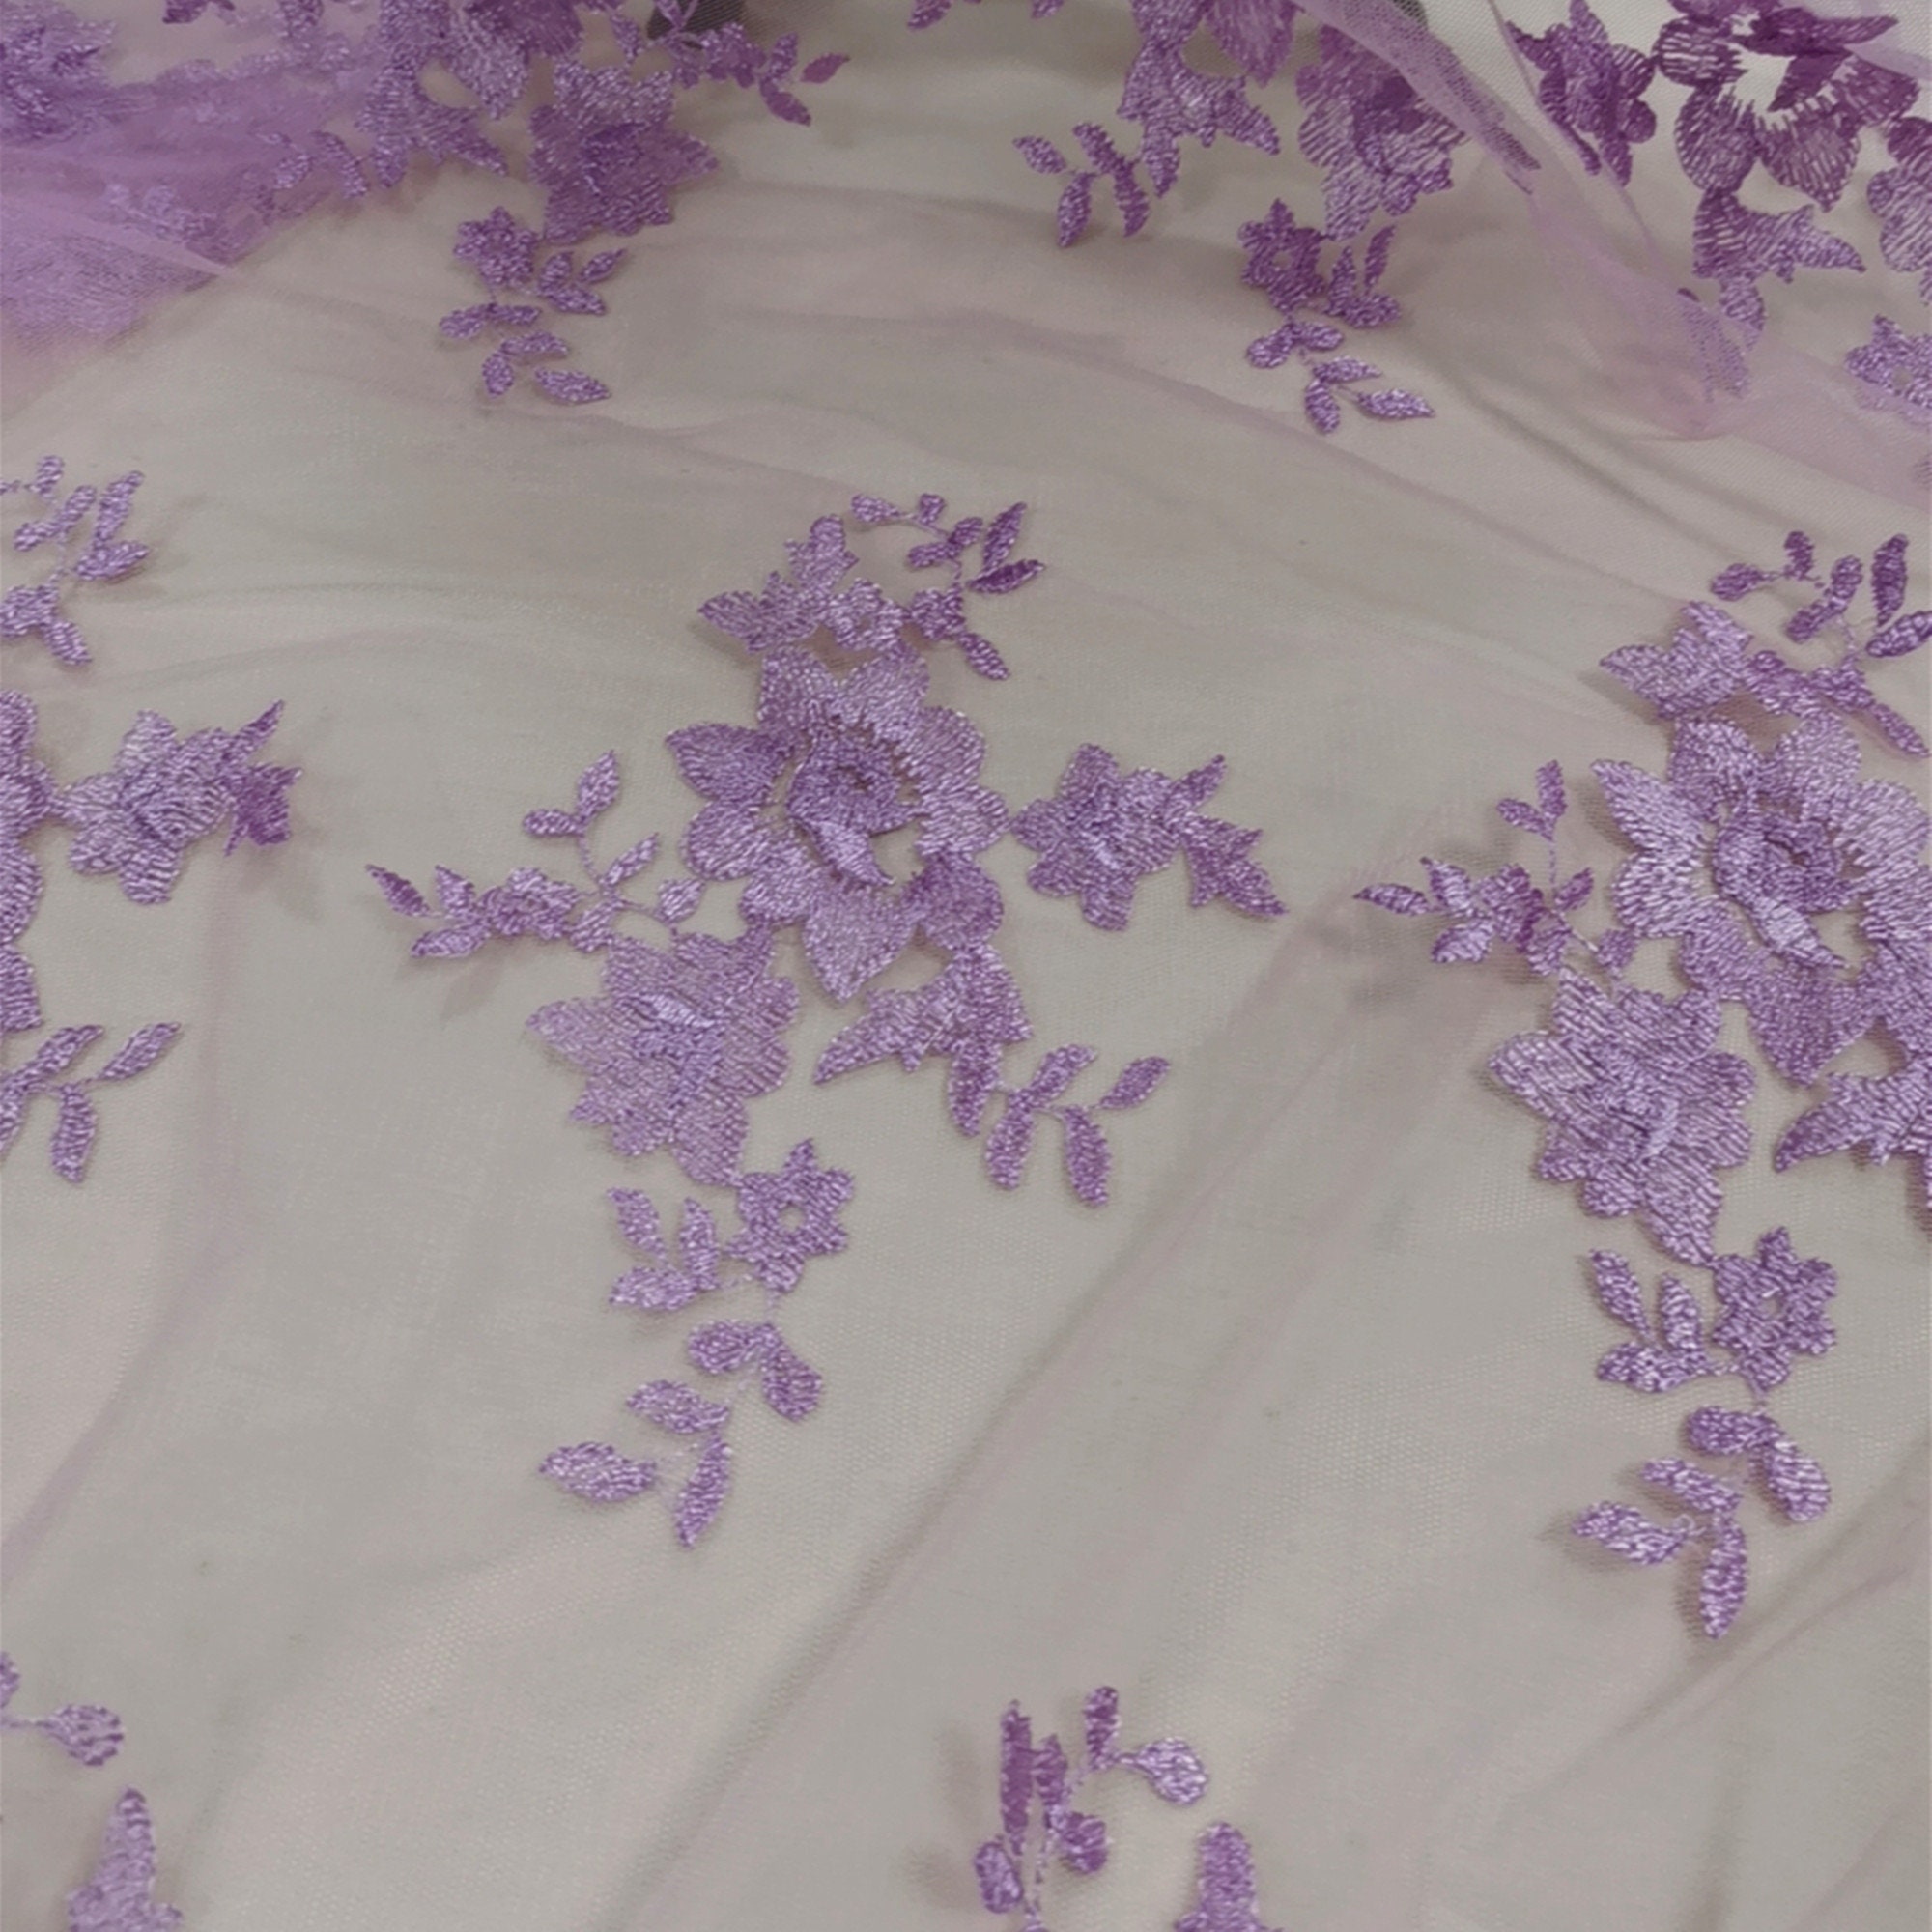 Charming Purple Lace Fabric Violet Floral Embroidery Lace | Etsy